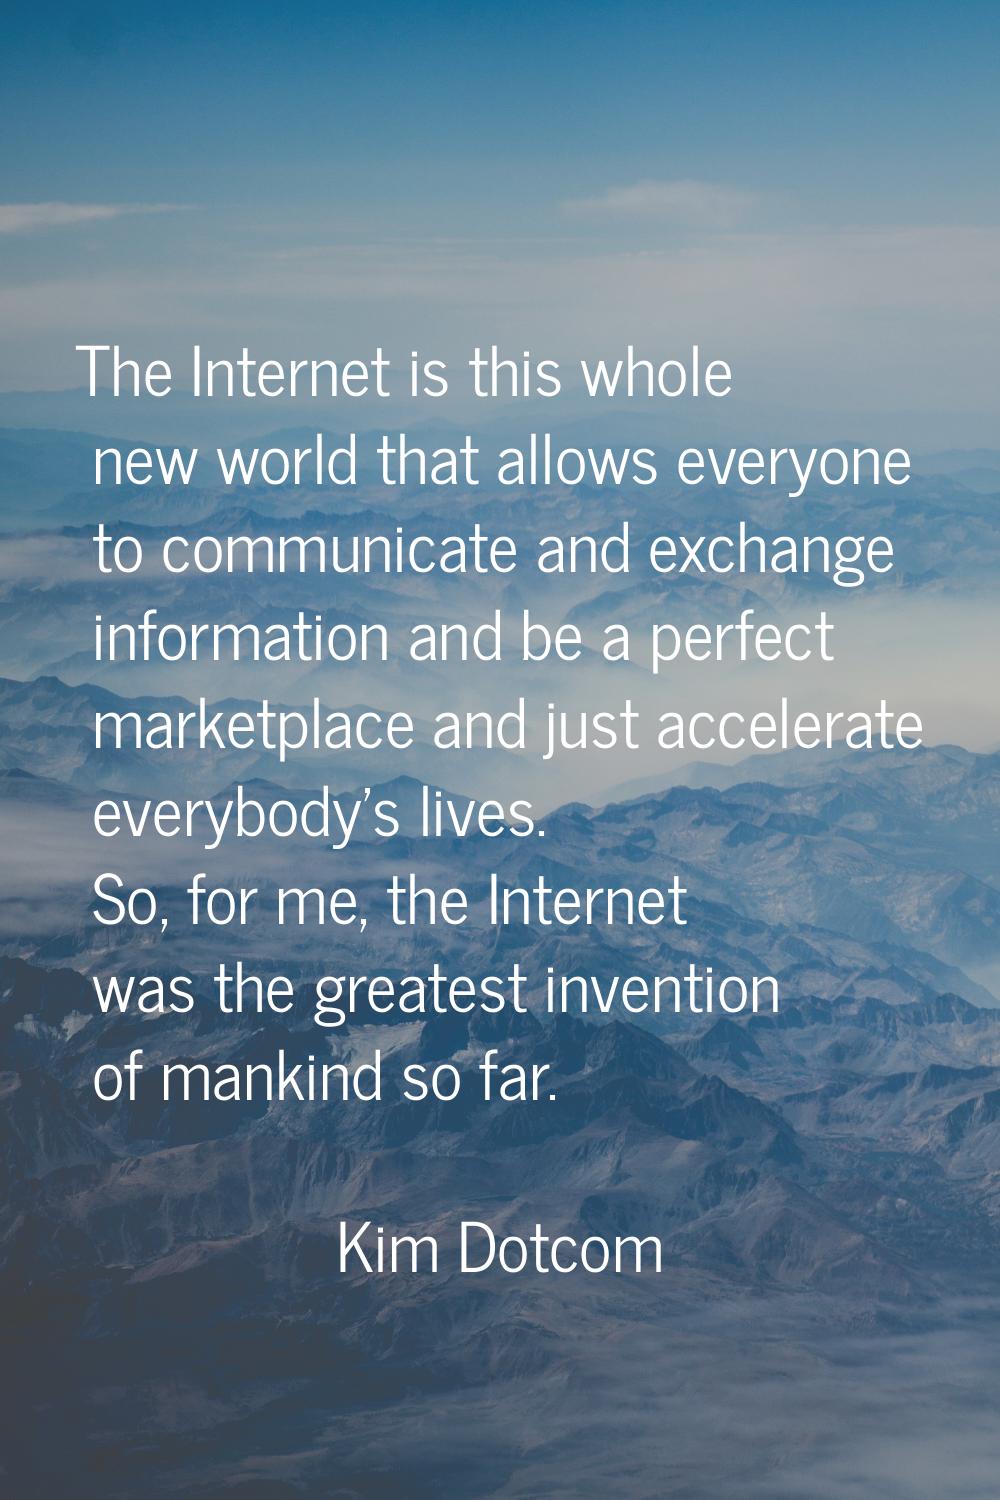 The Internet is this whole new world that allows everyone to communicate and exchange information a